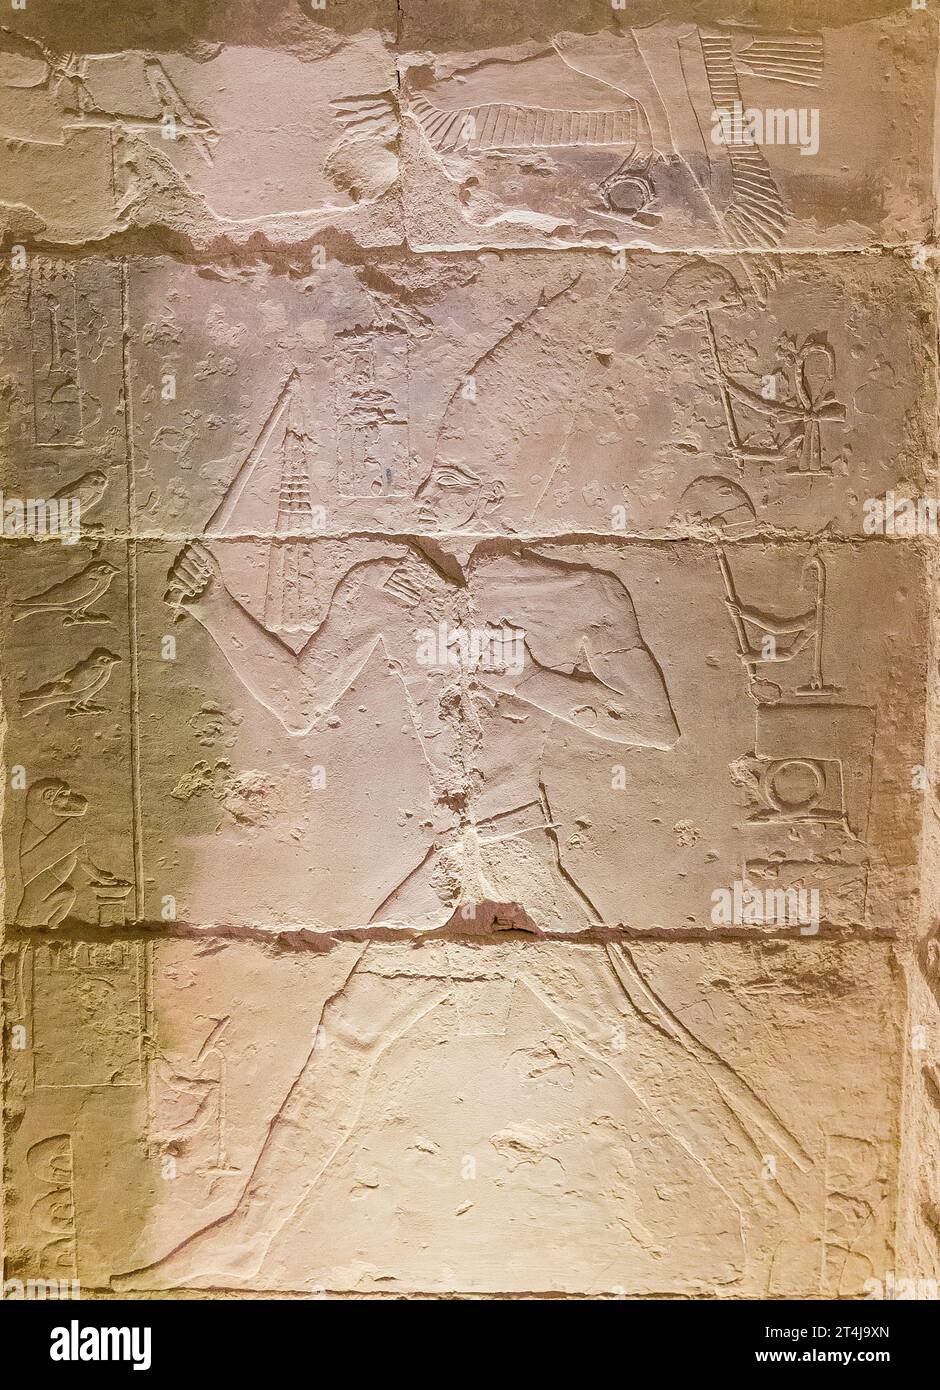 Egypt, Saqqara, Djoser pyramid, North Tomb, king Djoser jubilee ceremony ('Sed feast') representations, in low relief. Stock Photo